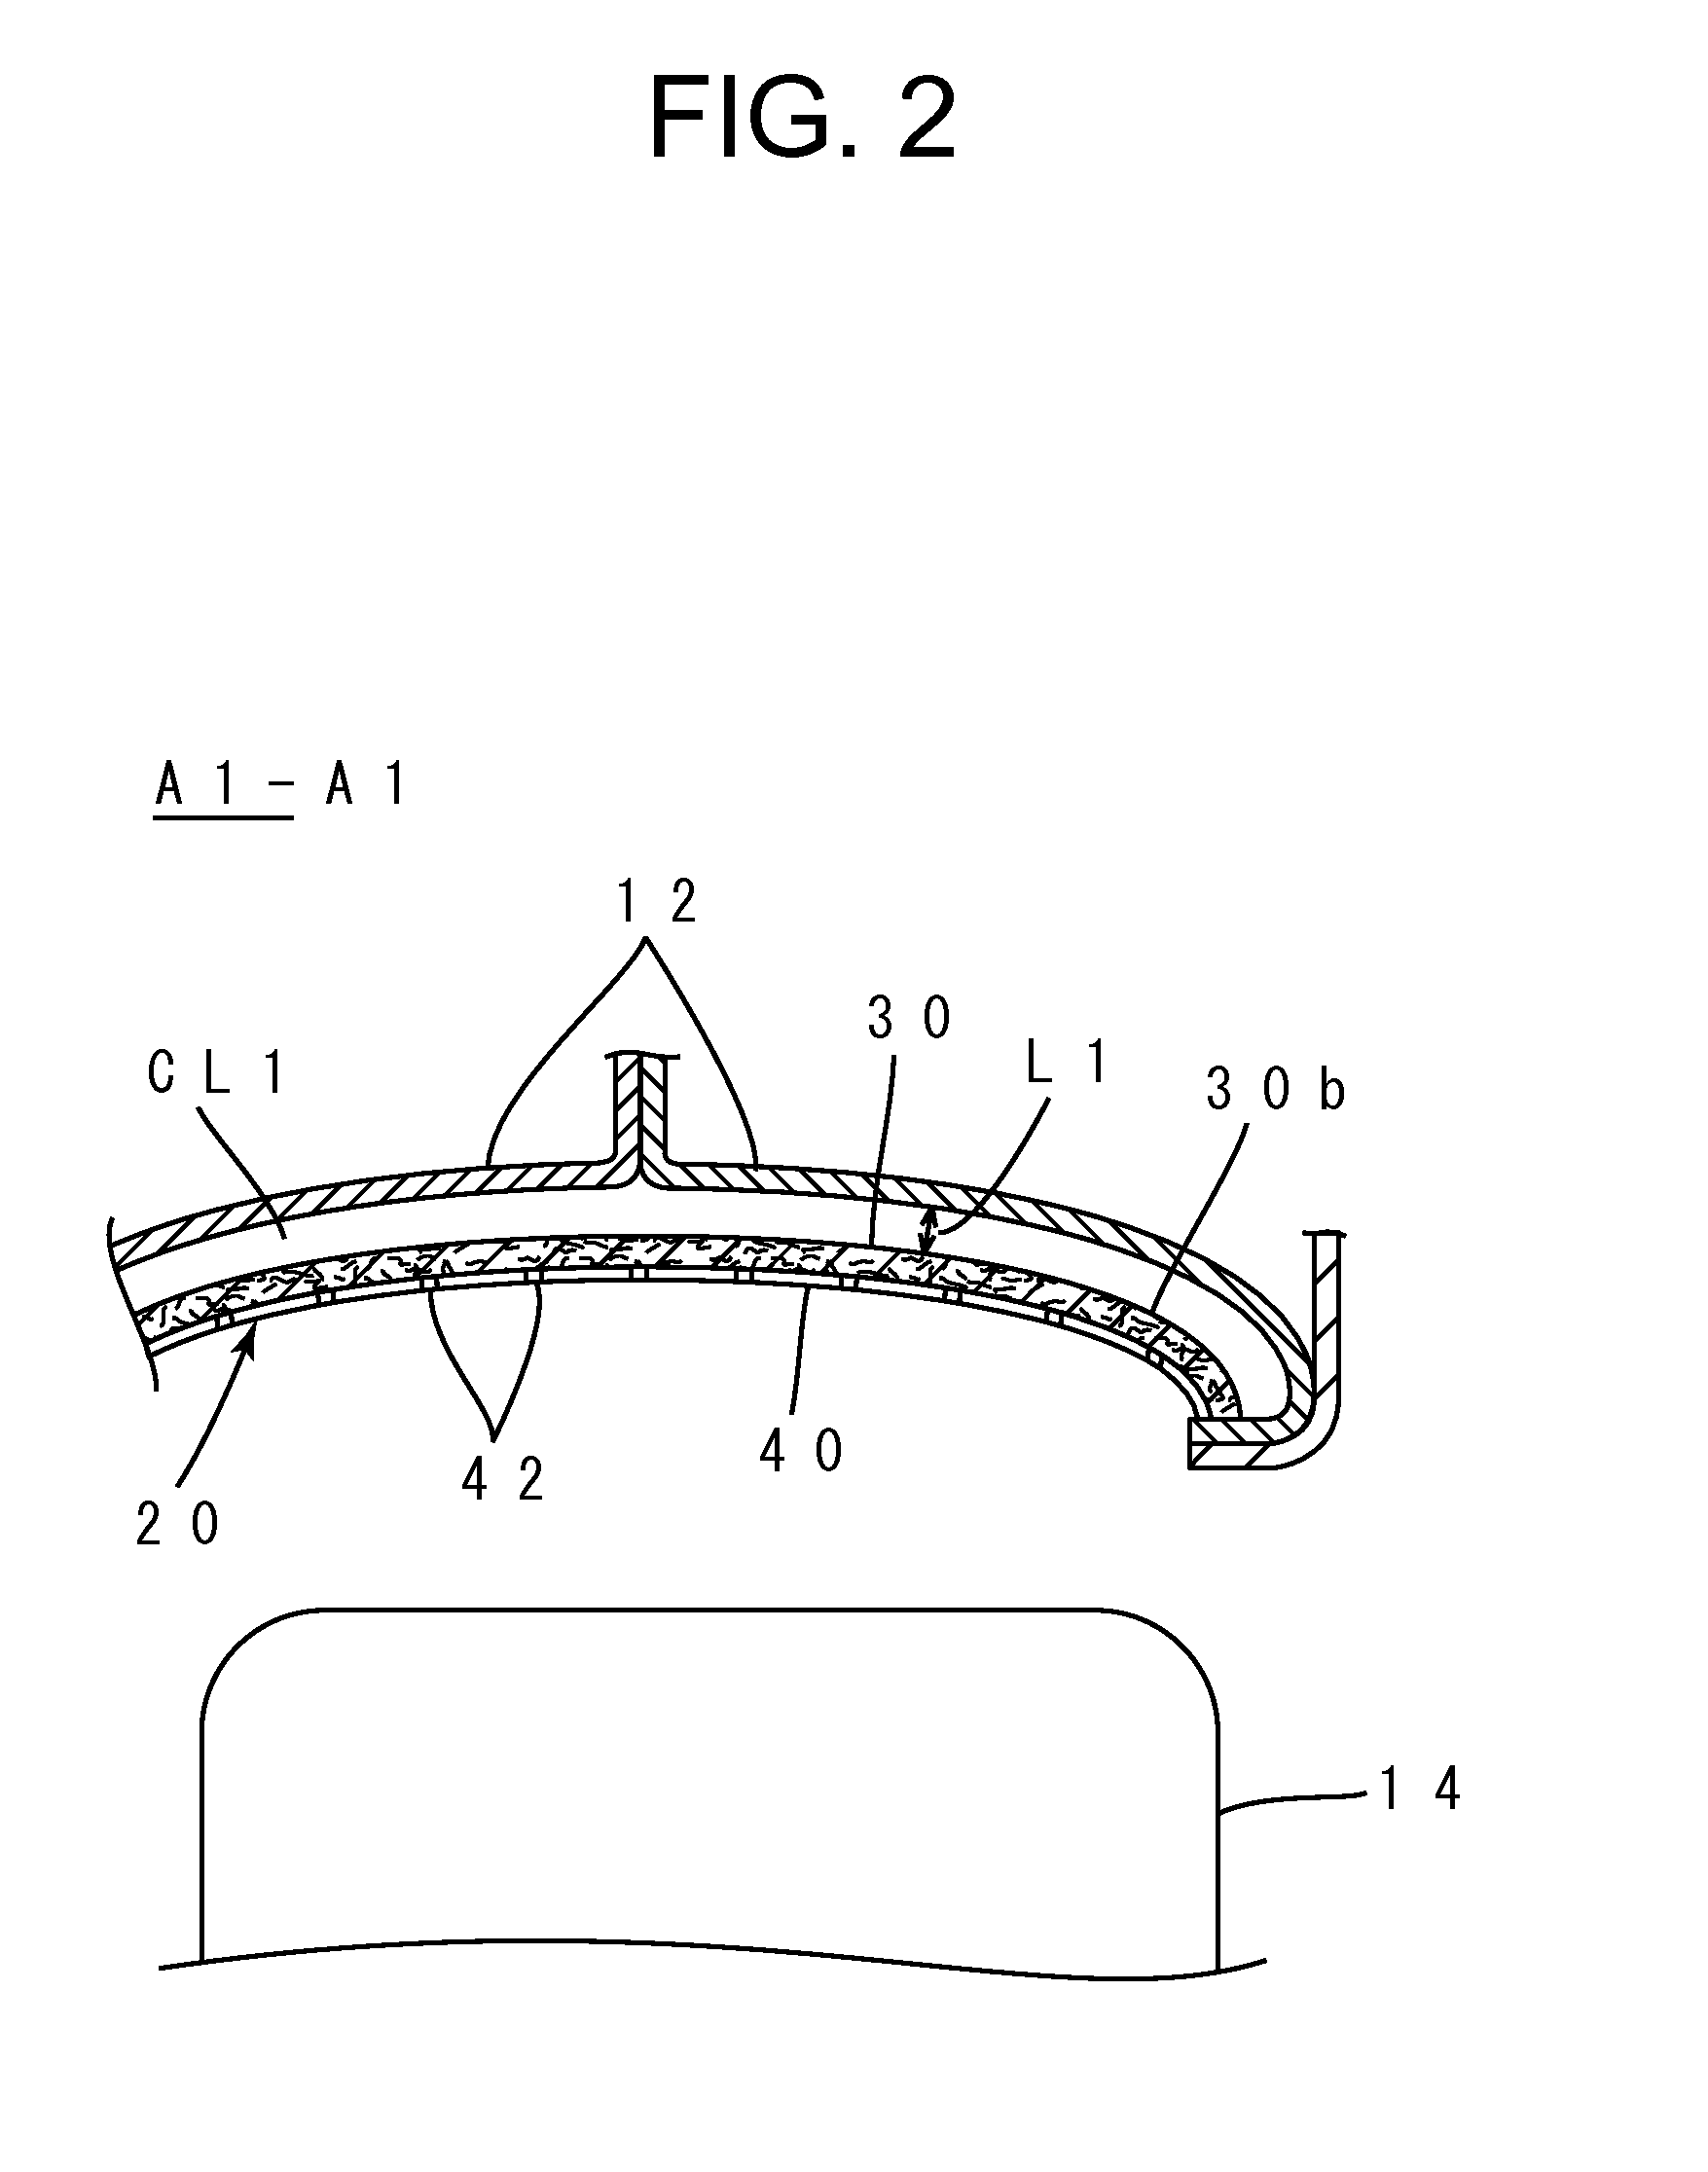 Fender liner and process for producing the same